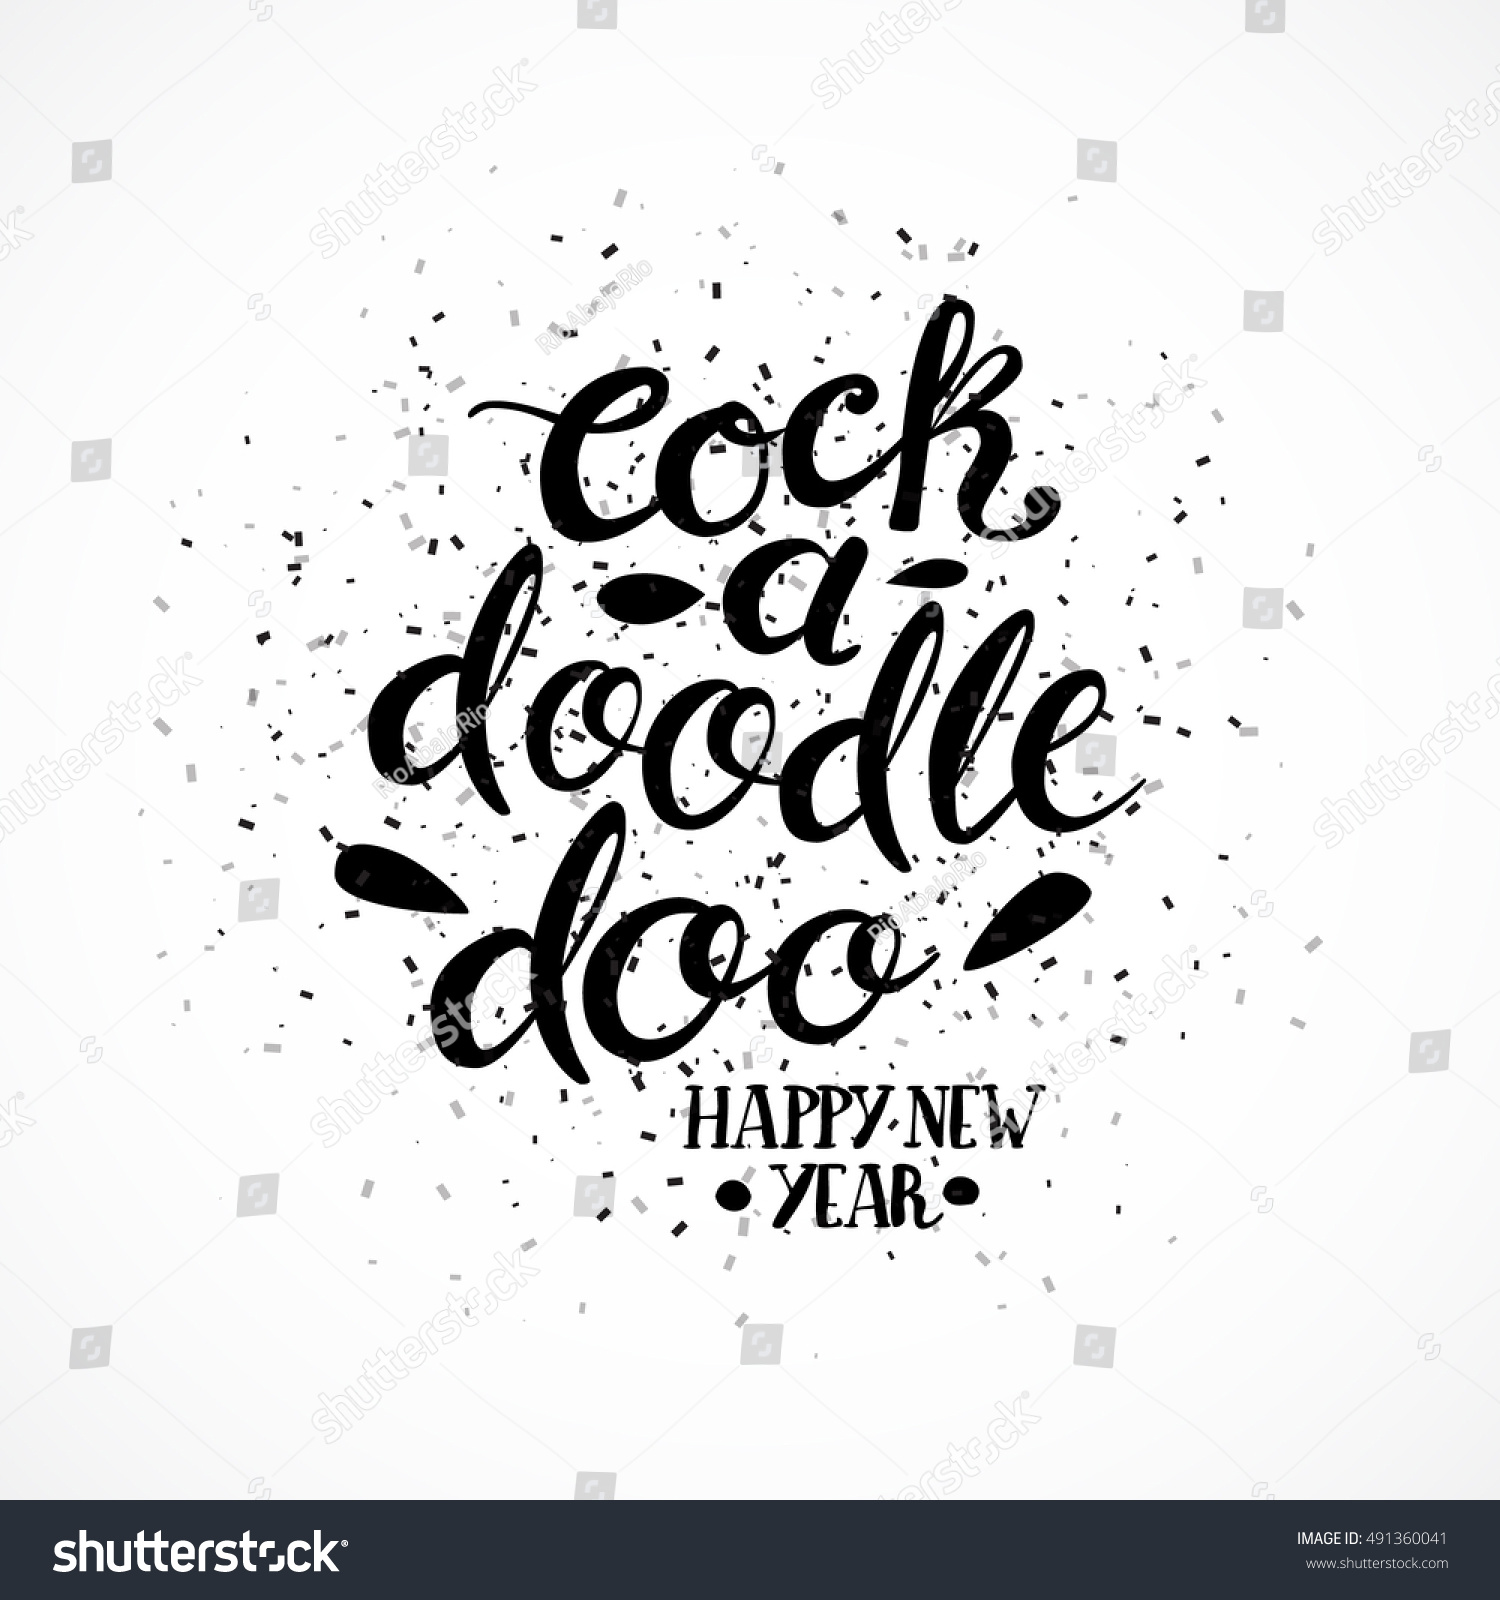 SVG of Cock a doodle doo. Happy New Year. Vector illustration for your graphic design. svg